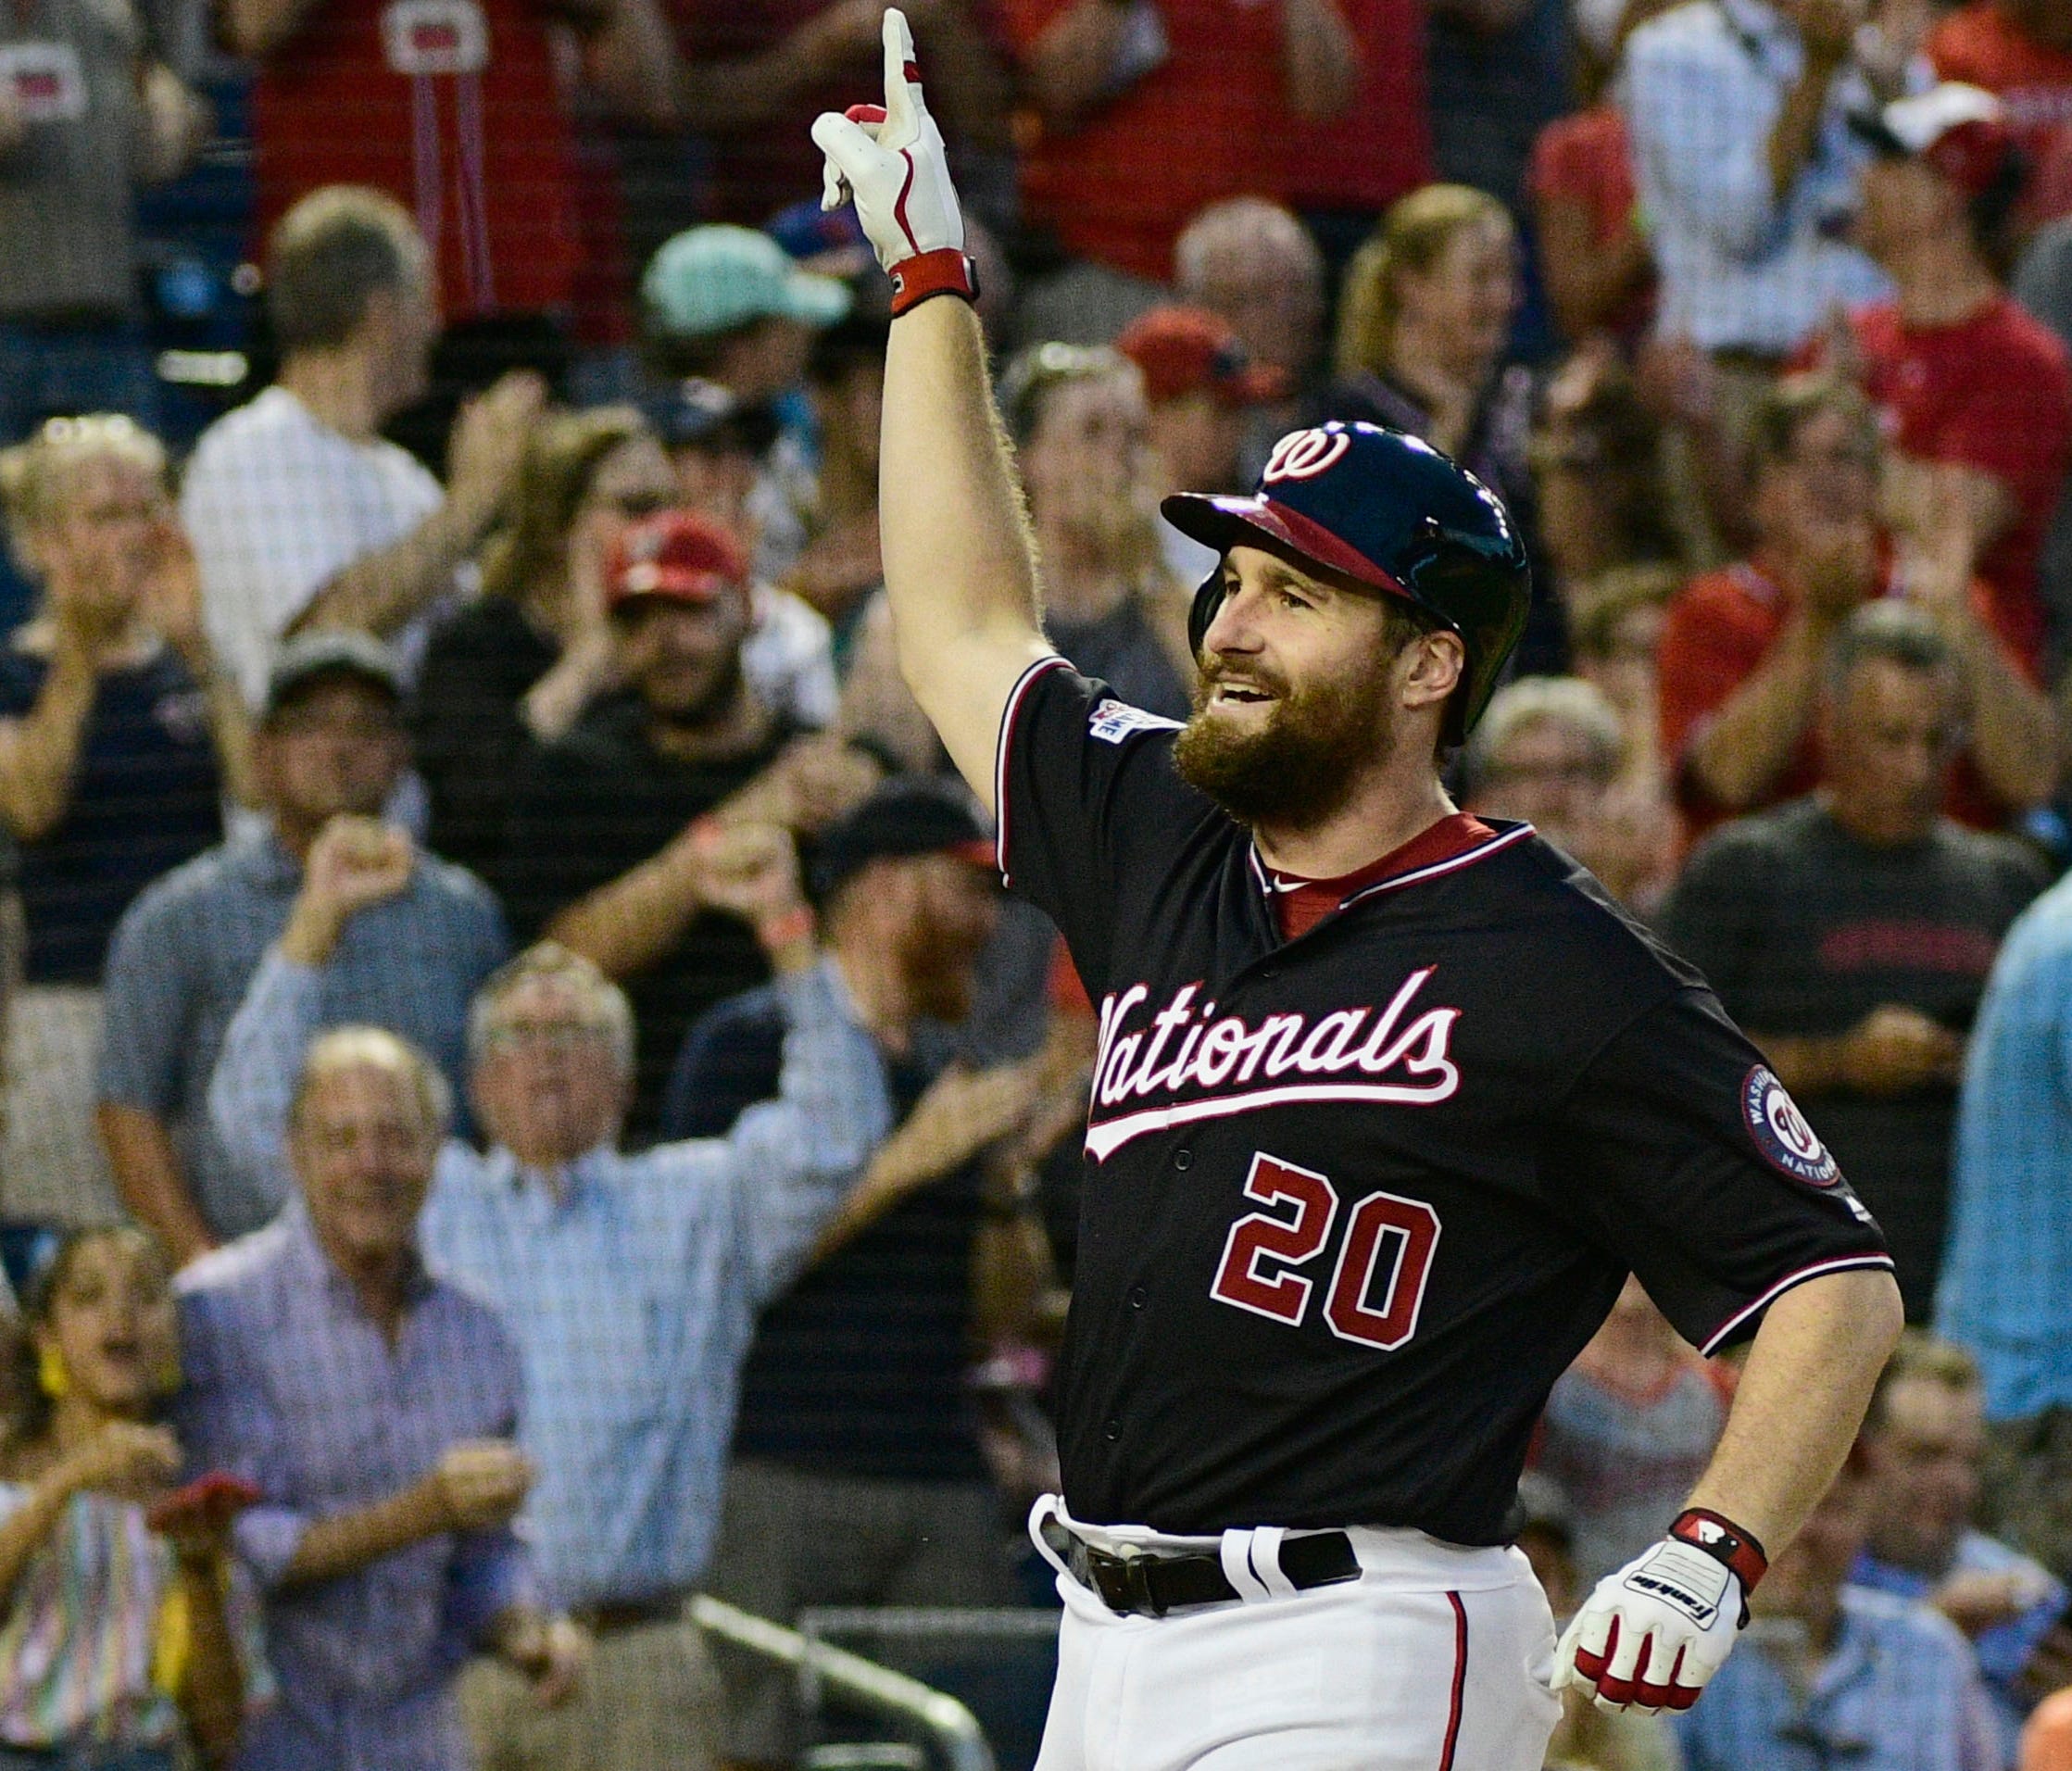 Washington Nationals second baseman Daniel Murphy (20) celebrates after hitting a three-run home run during the third inning against the New York Mets at Nationals Park.